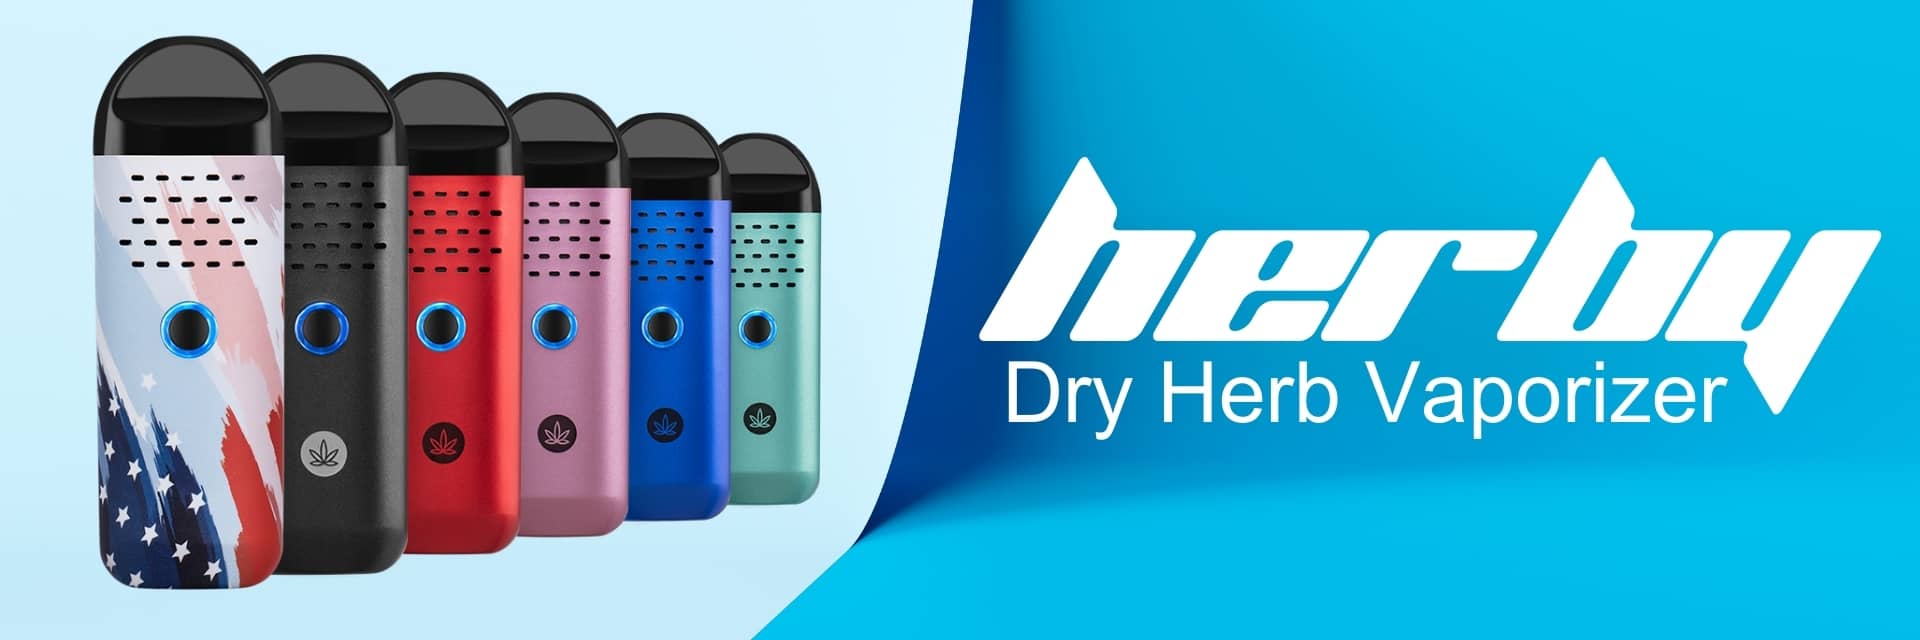 Cipher Herby dry herb vaporizer 420 promotions banner